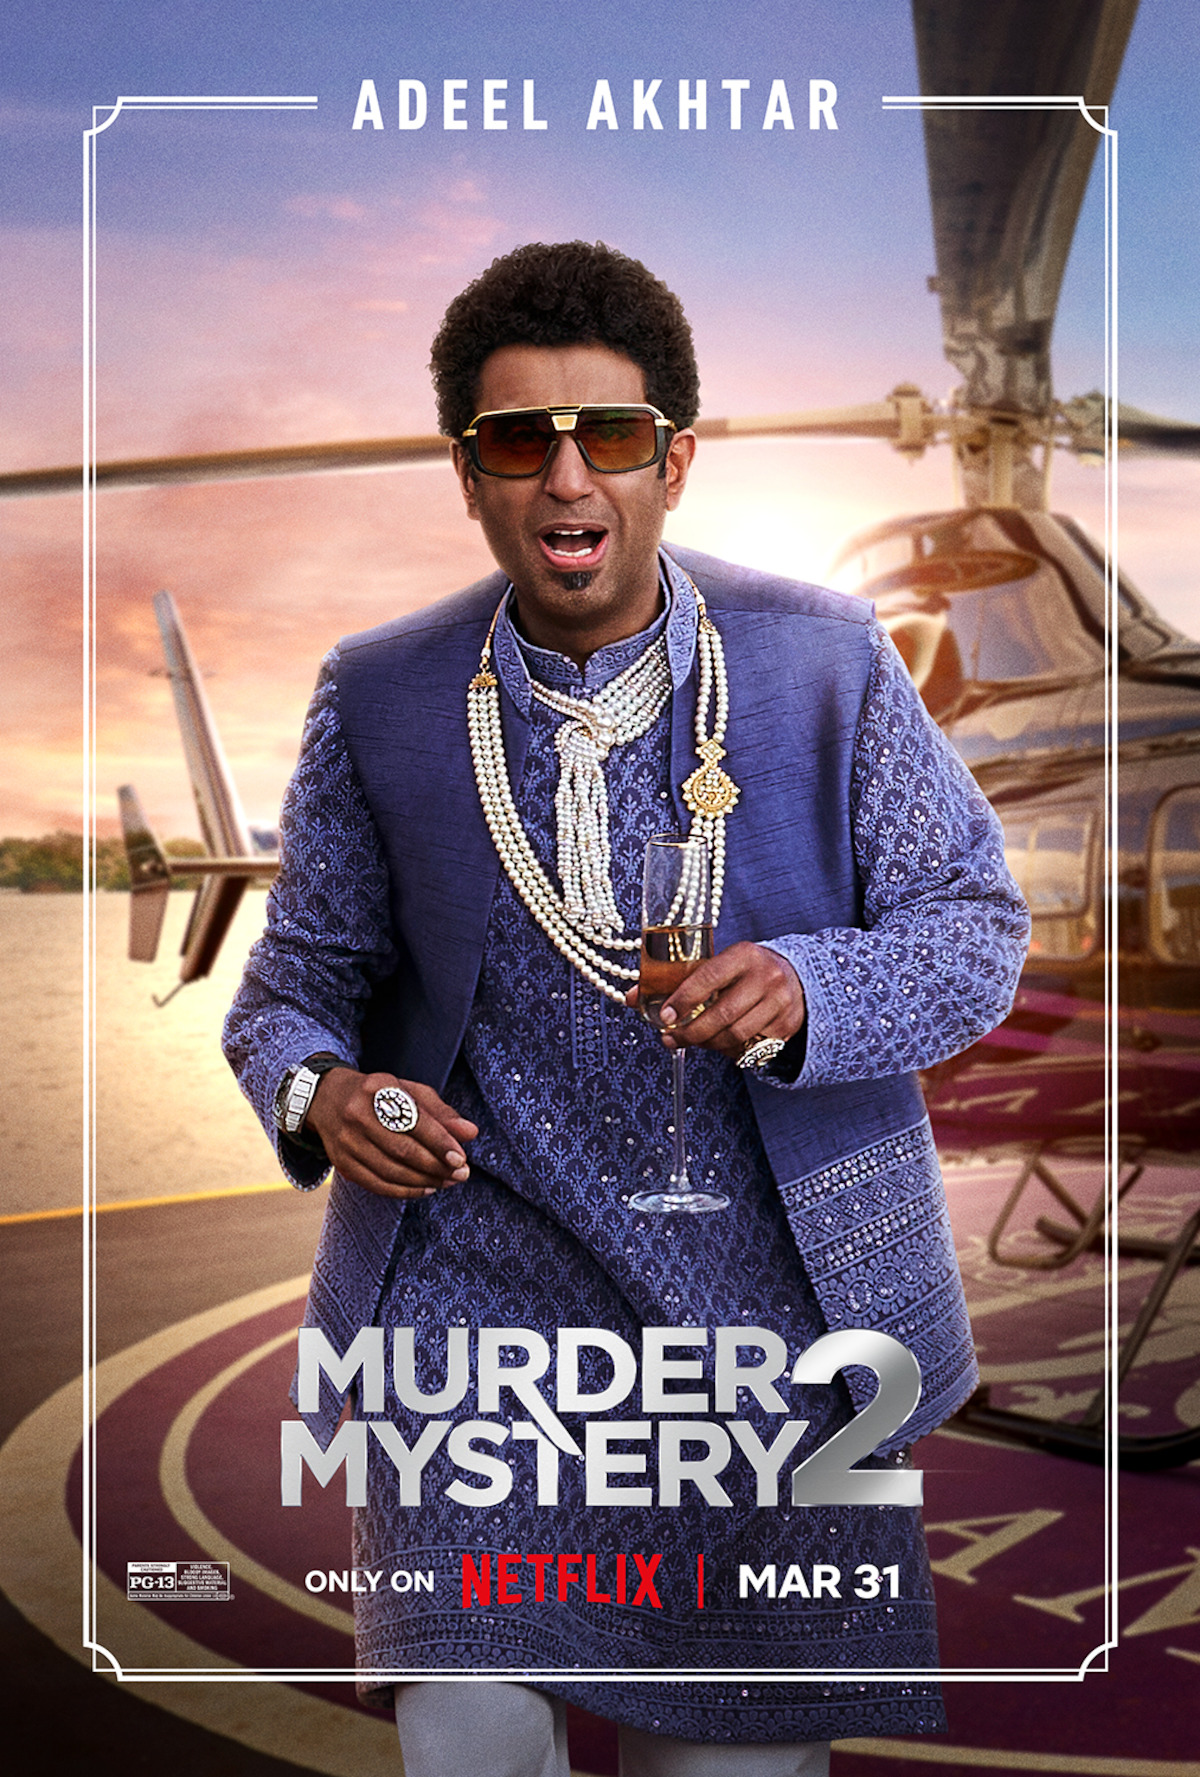 Murder Mystery 2 Trailer Release Date, Cast & Everything We Know